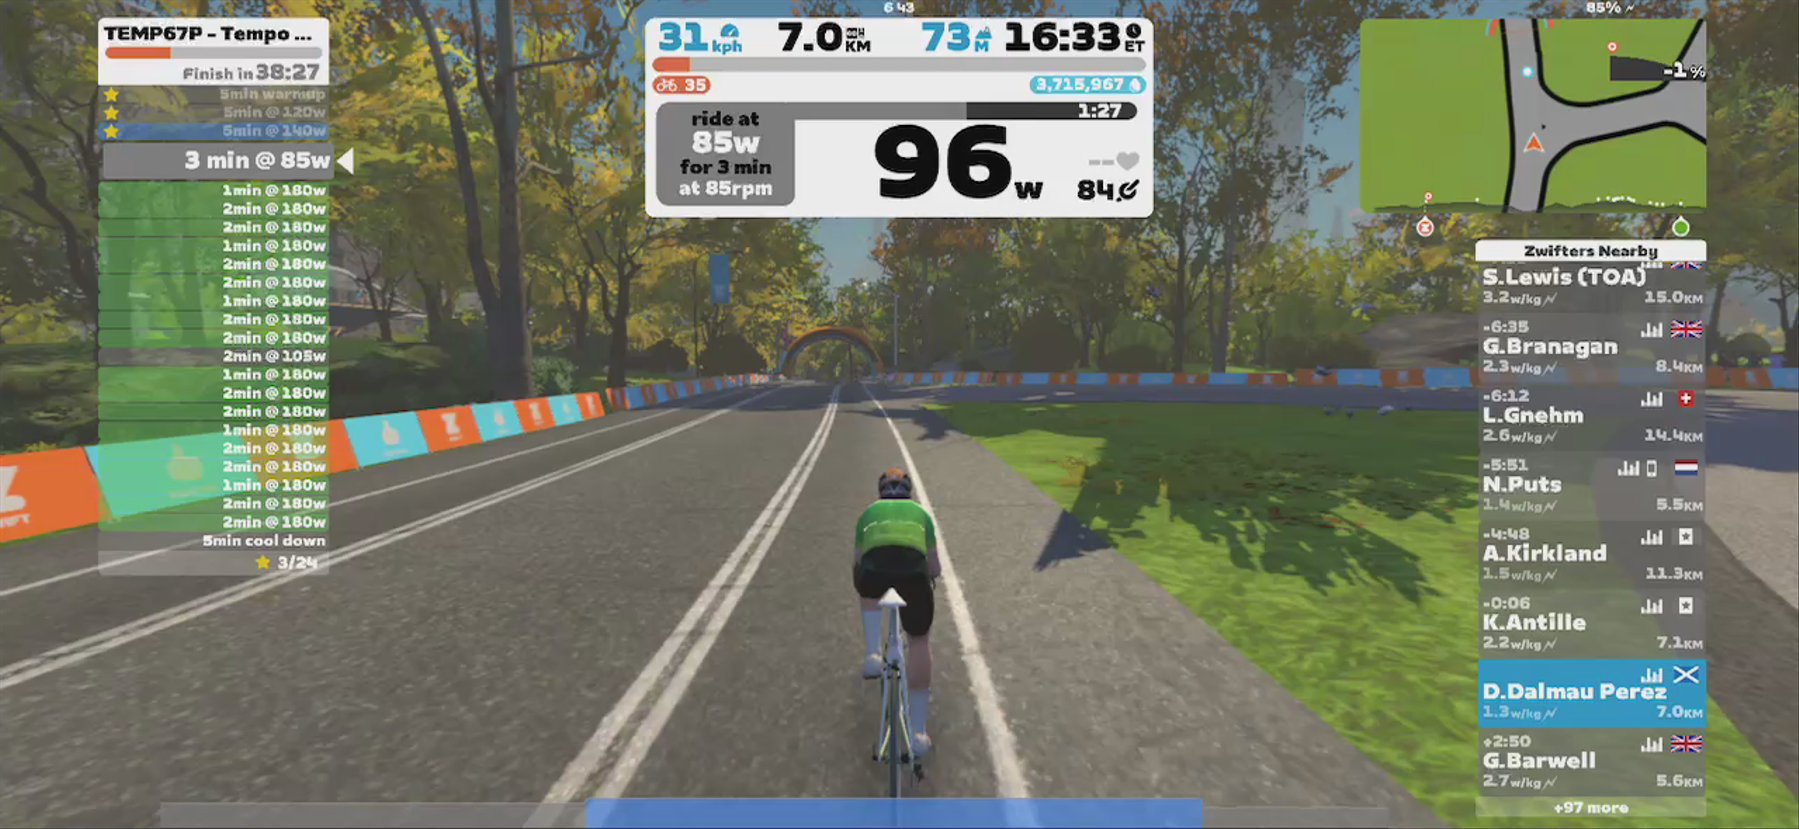 Zwift - TEMP67P - Tempo Cadence Play on the MA-10 312 in New York